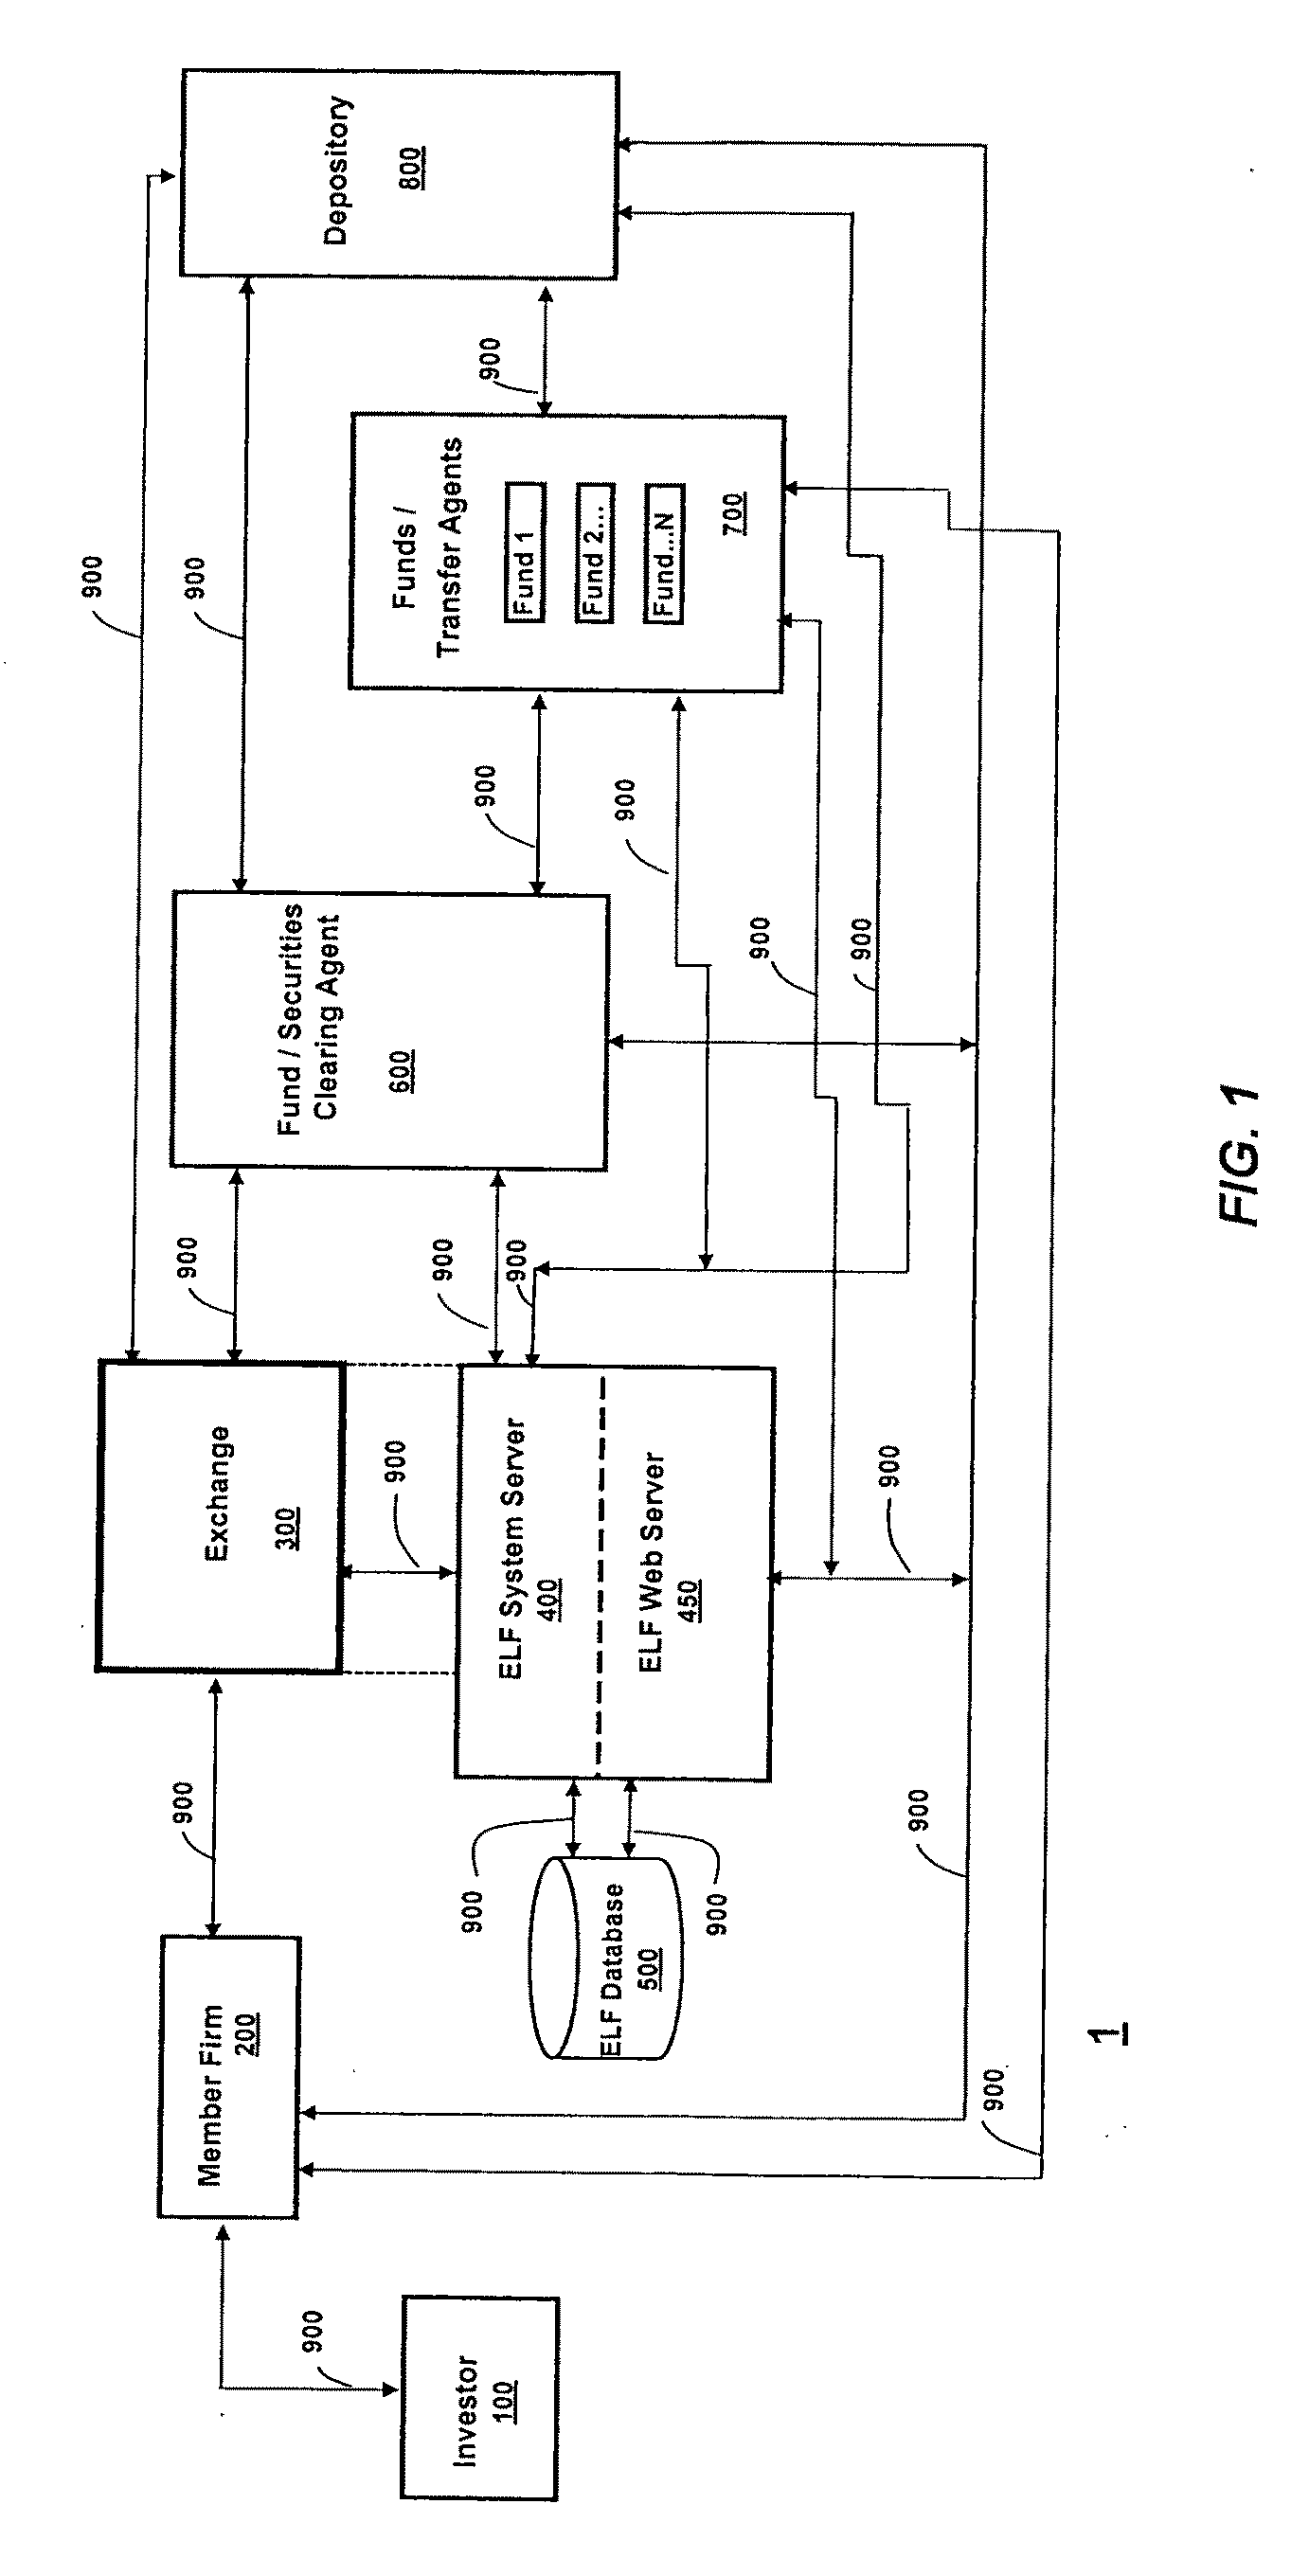 System and methods for processing open-end mutual fund purchase and redemption orders at centralized securities exchanges and other securities trading and processing platforms